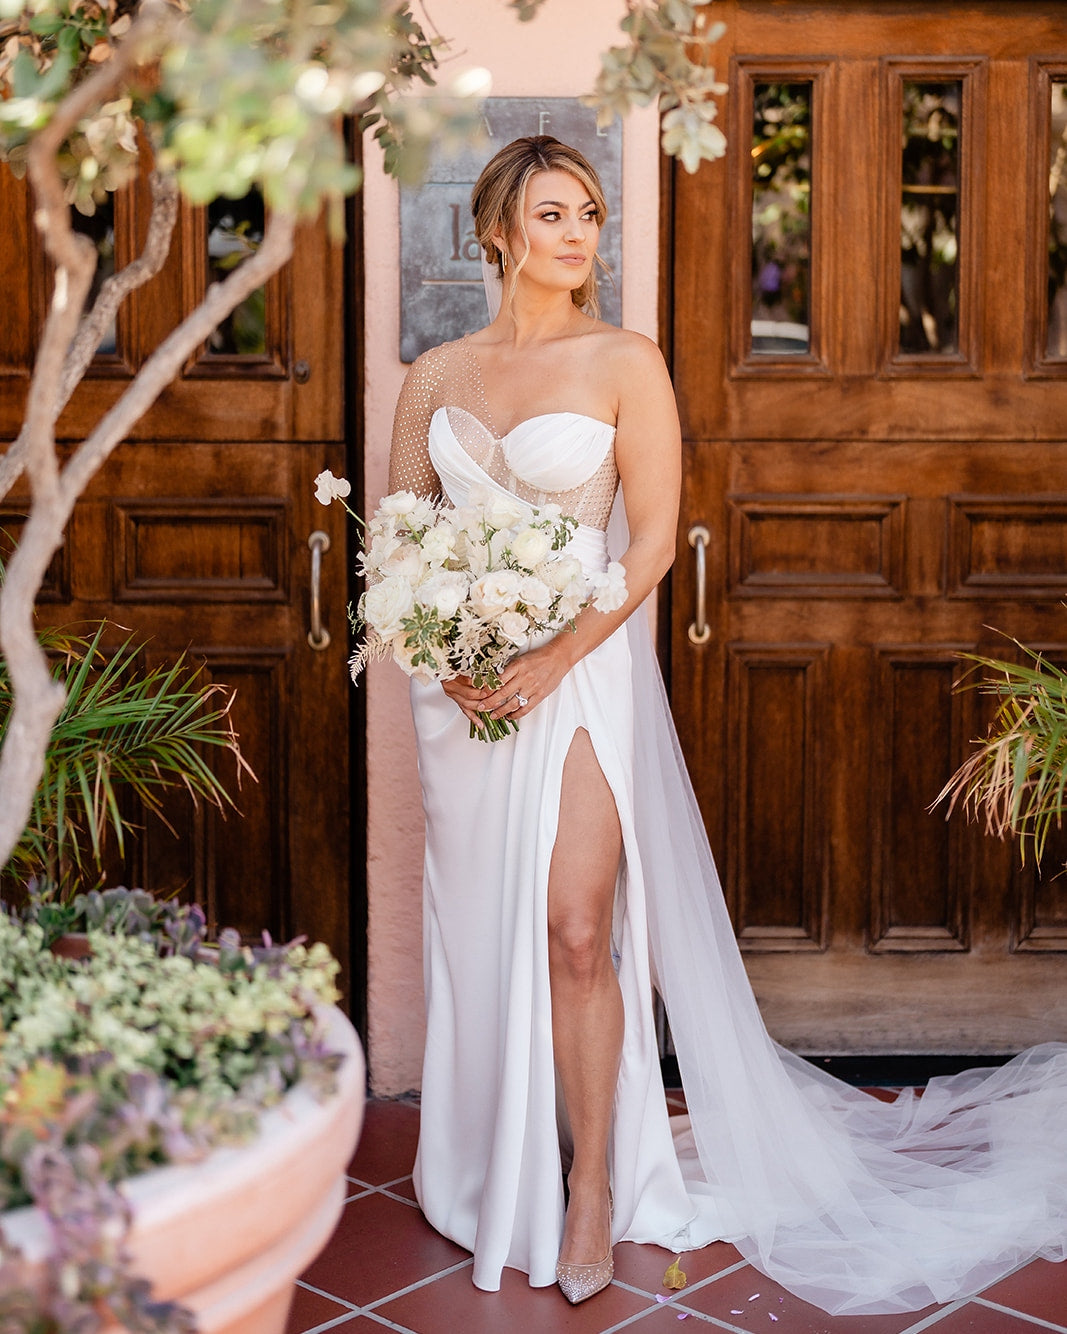 a bride posing in her wedding dress with the wedding bouquet in her hand